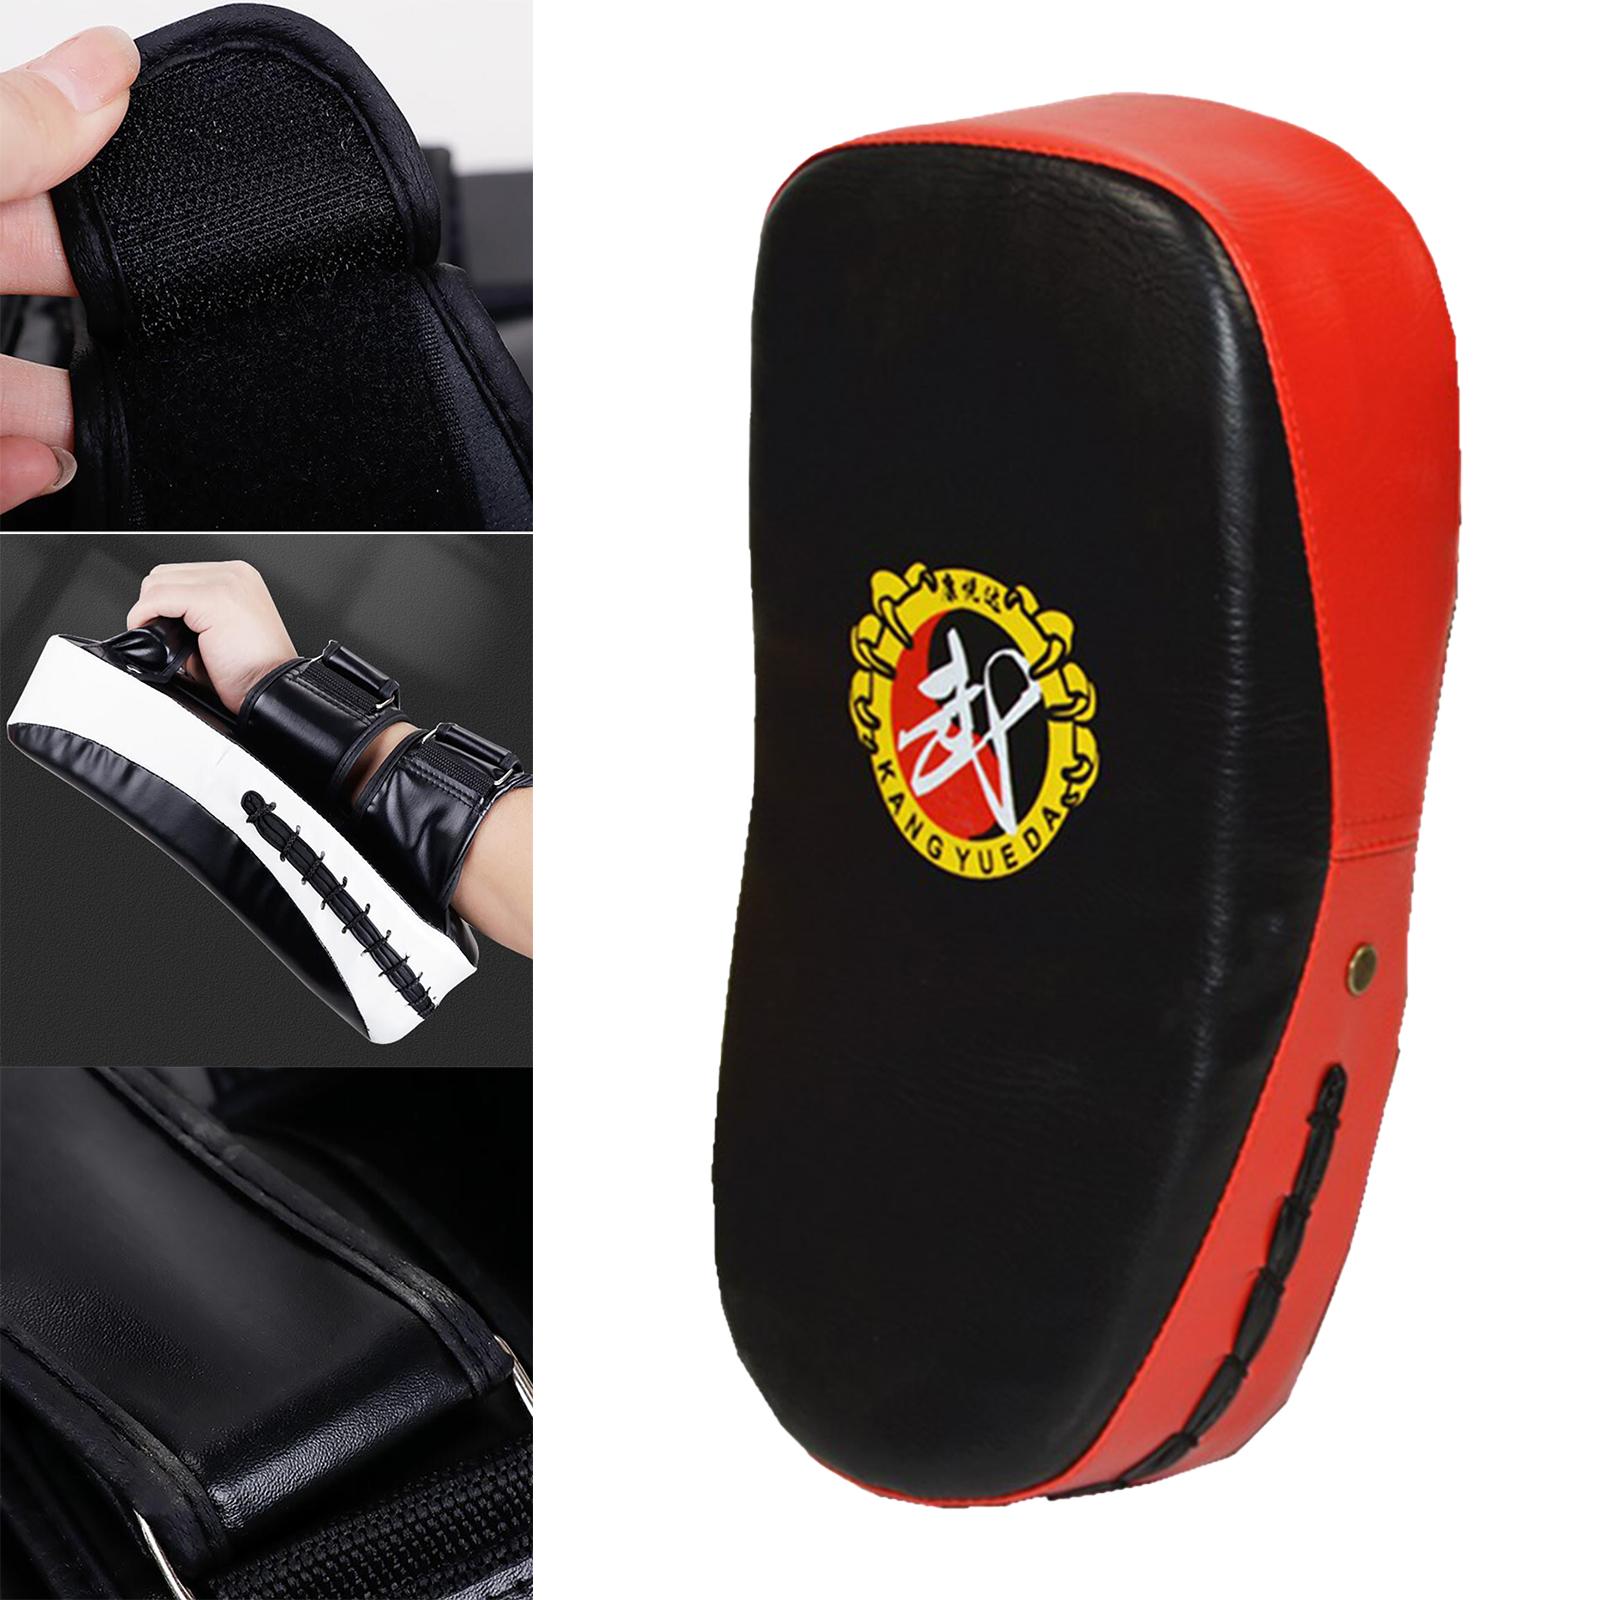 Kicking Striking Body Pad Kickboxing Mma Punch Bag Boxing Curved Focus Mitts red 36x19x8.5cm